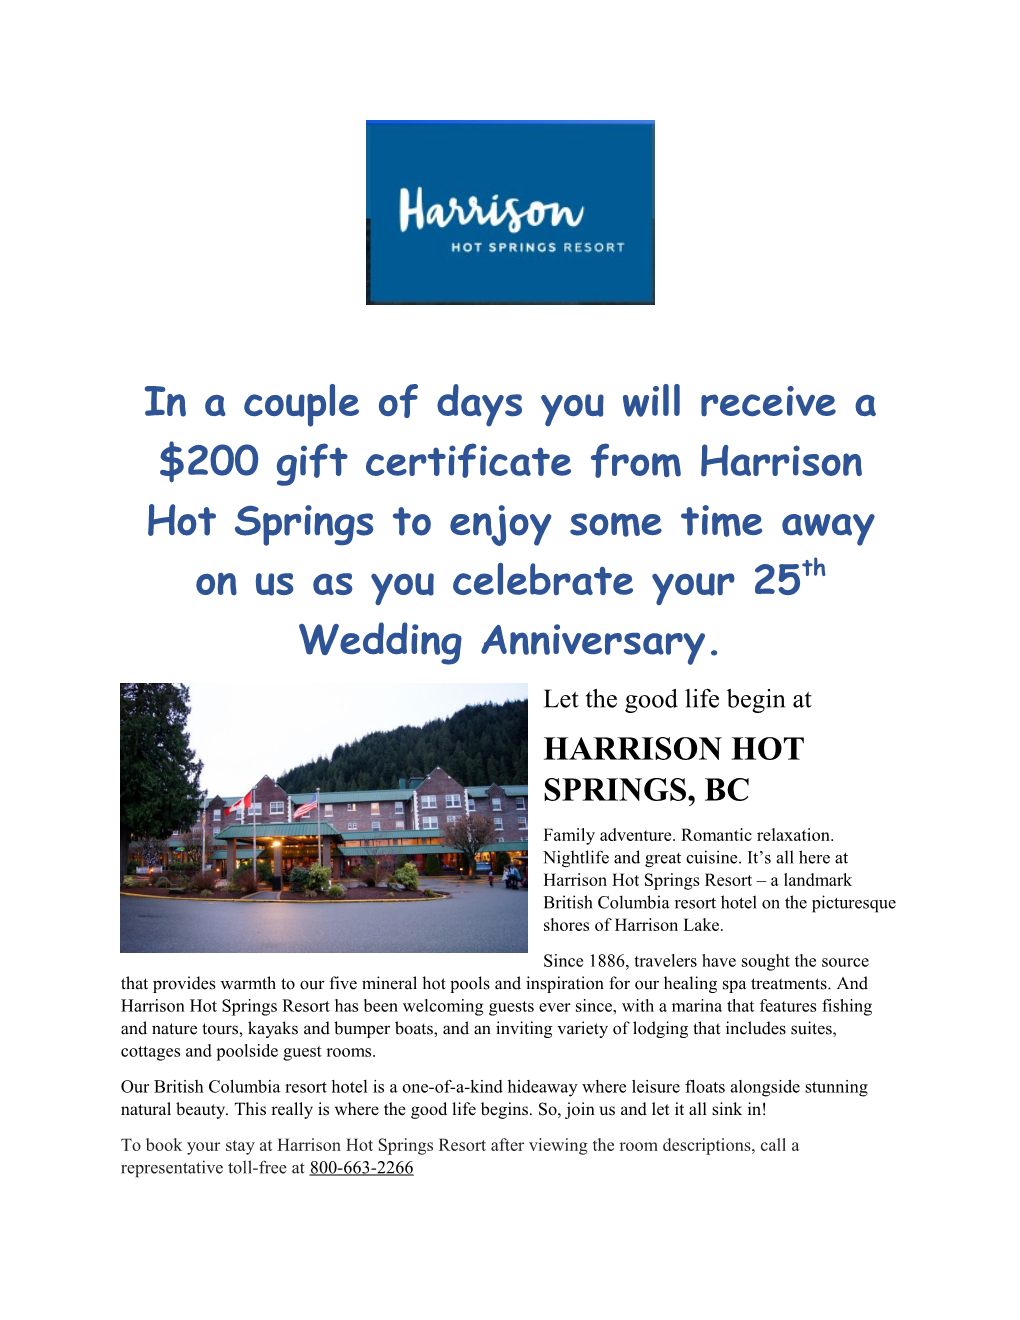 In a Couple of Days You Will Receive a $200 Gift Certificate from Harrison Hot Springs